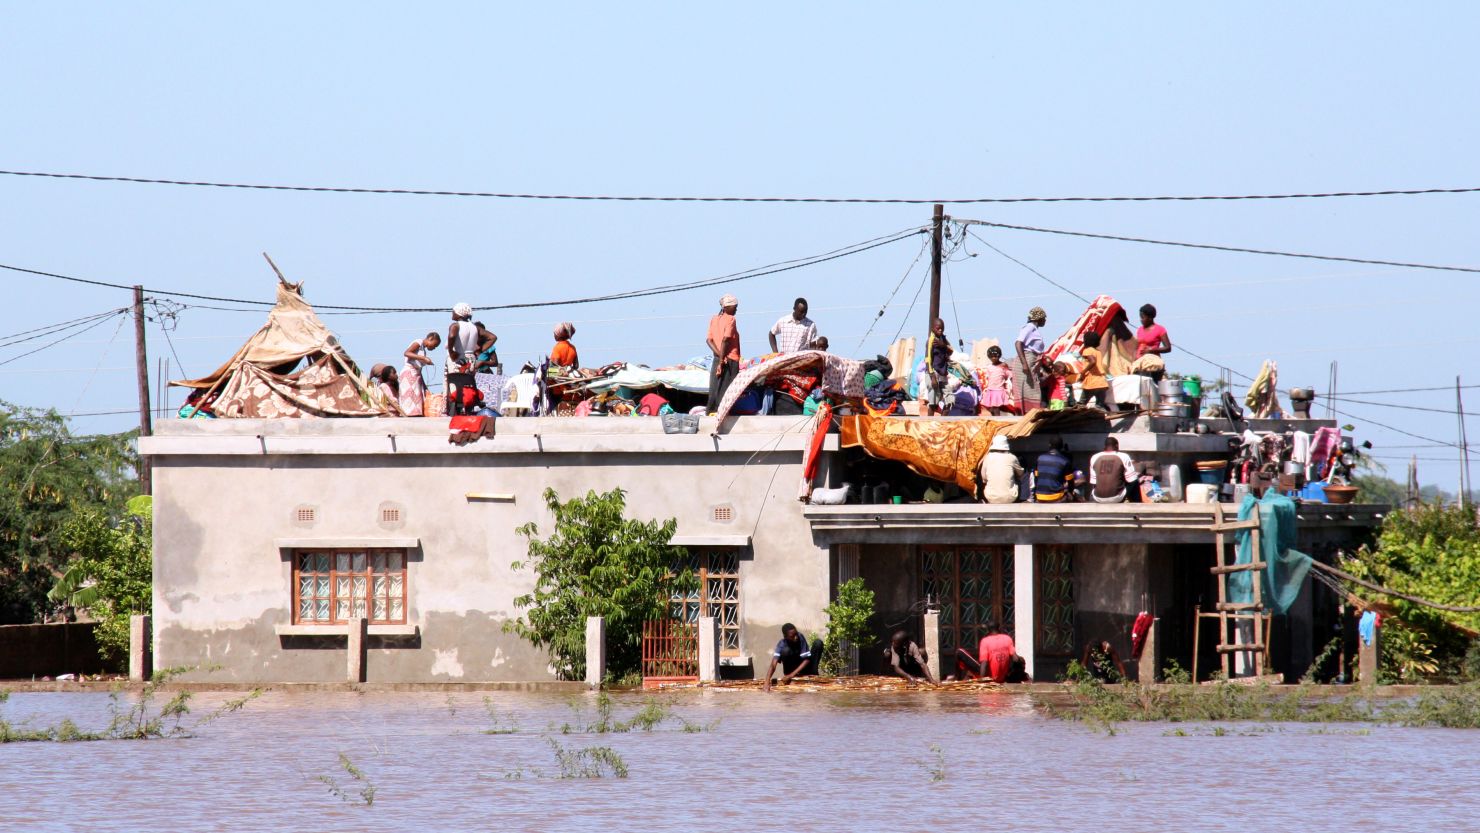 Residents flee to the roof of a house in Mozambique on Friday to escape the floods.